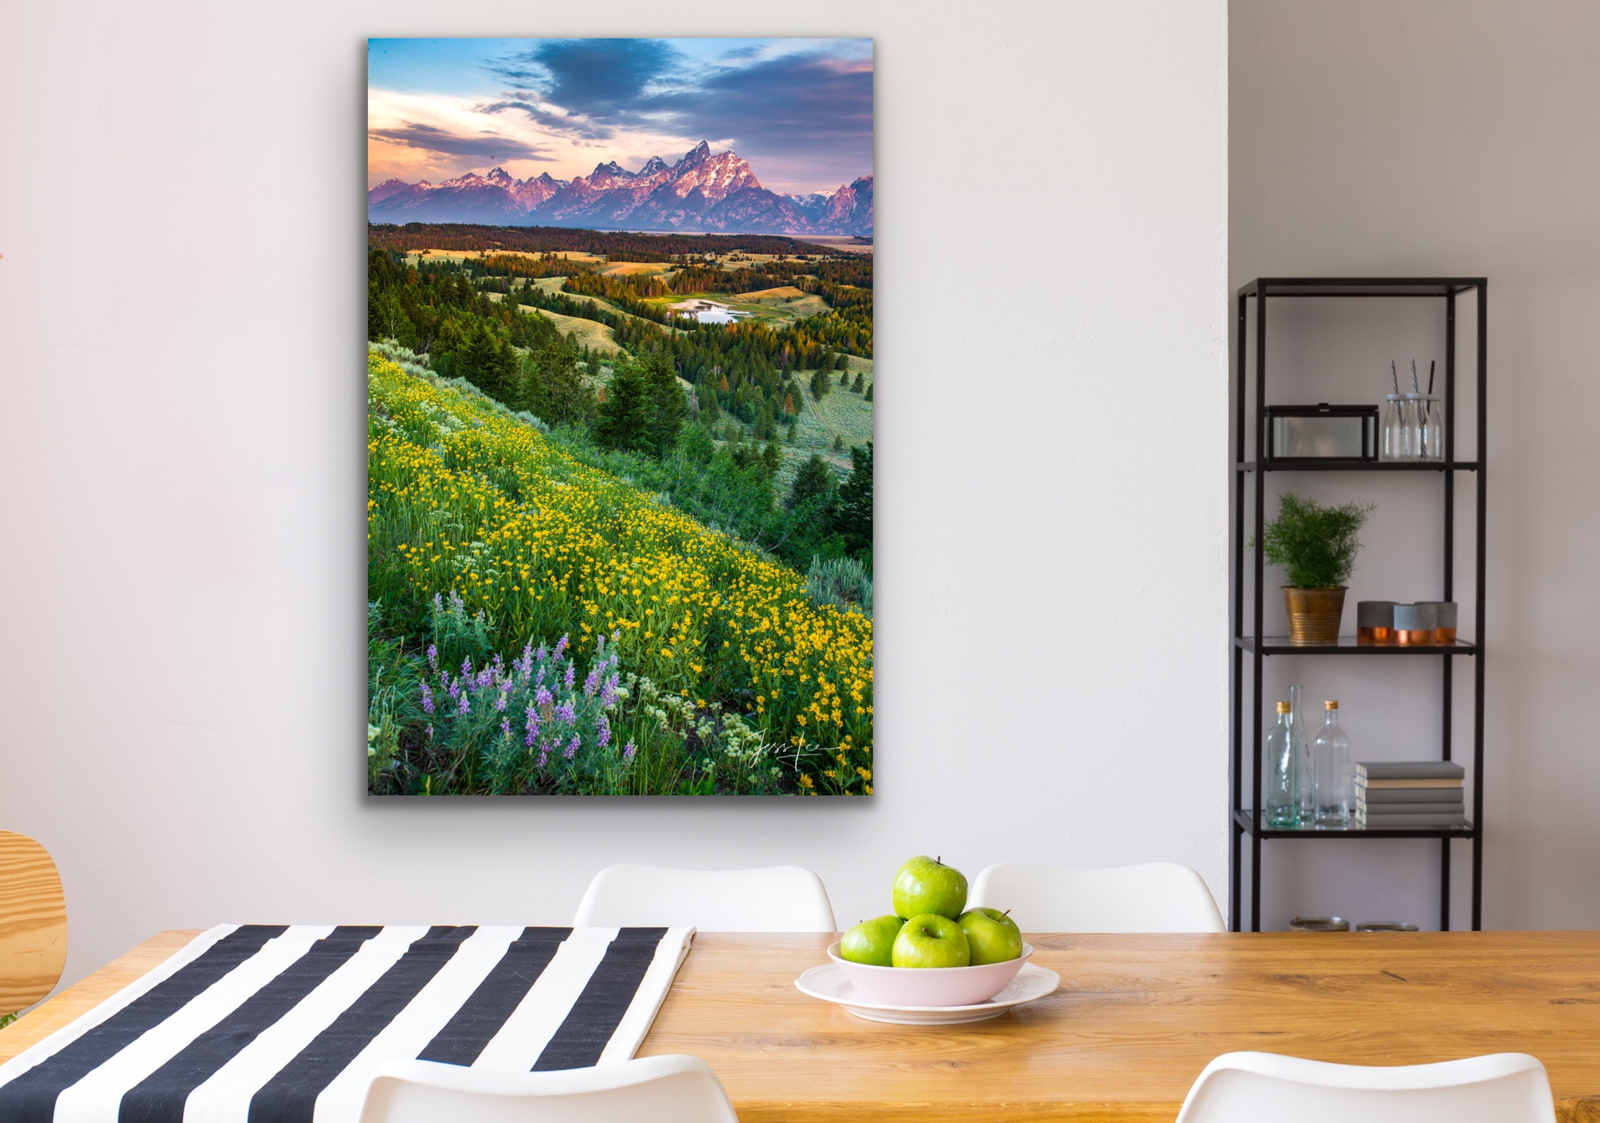 Luxury Fine High Quaintly Photography Prints on your wall art space. By world Famous Fine art Photographer Jess Lee